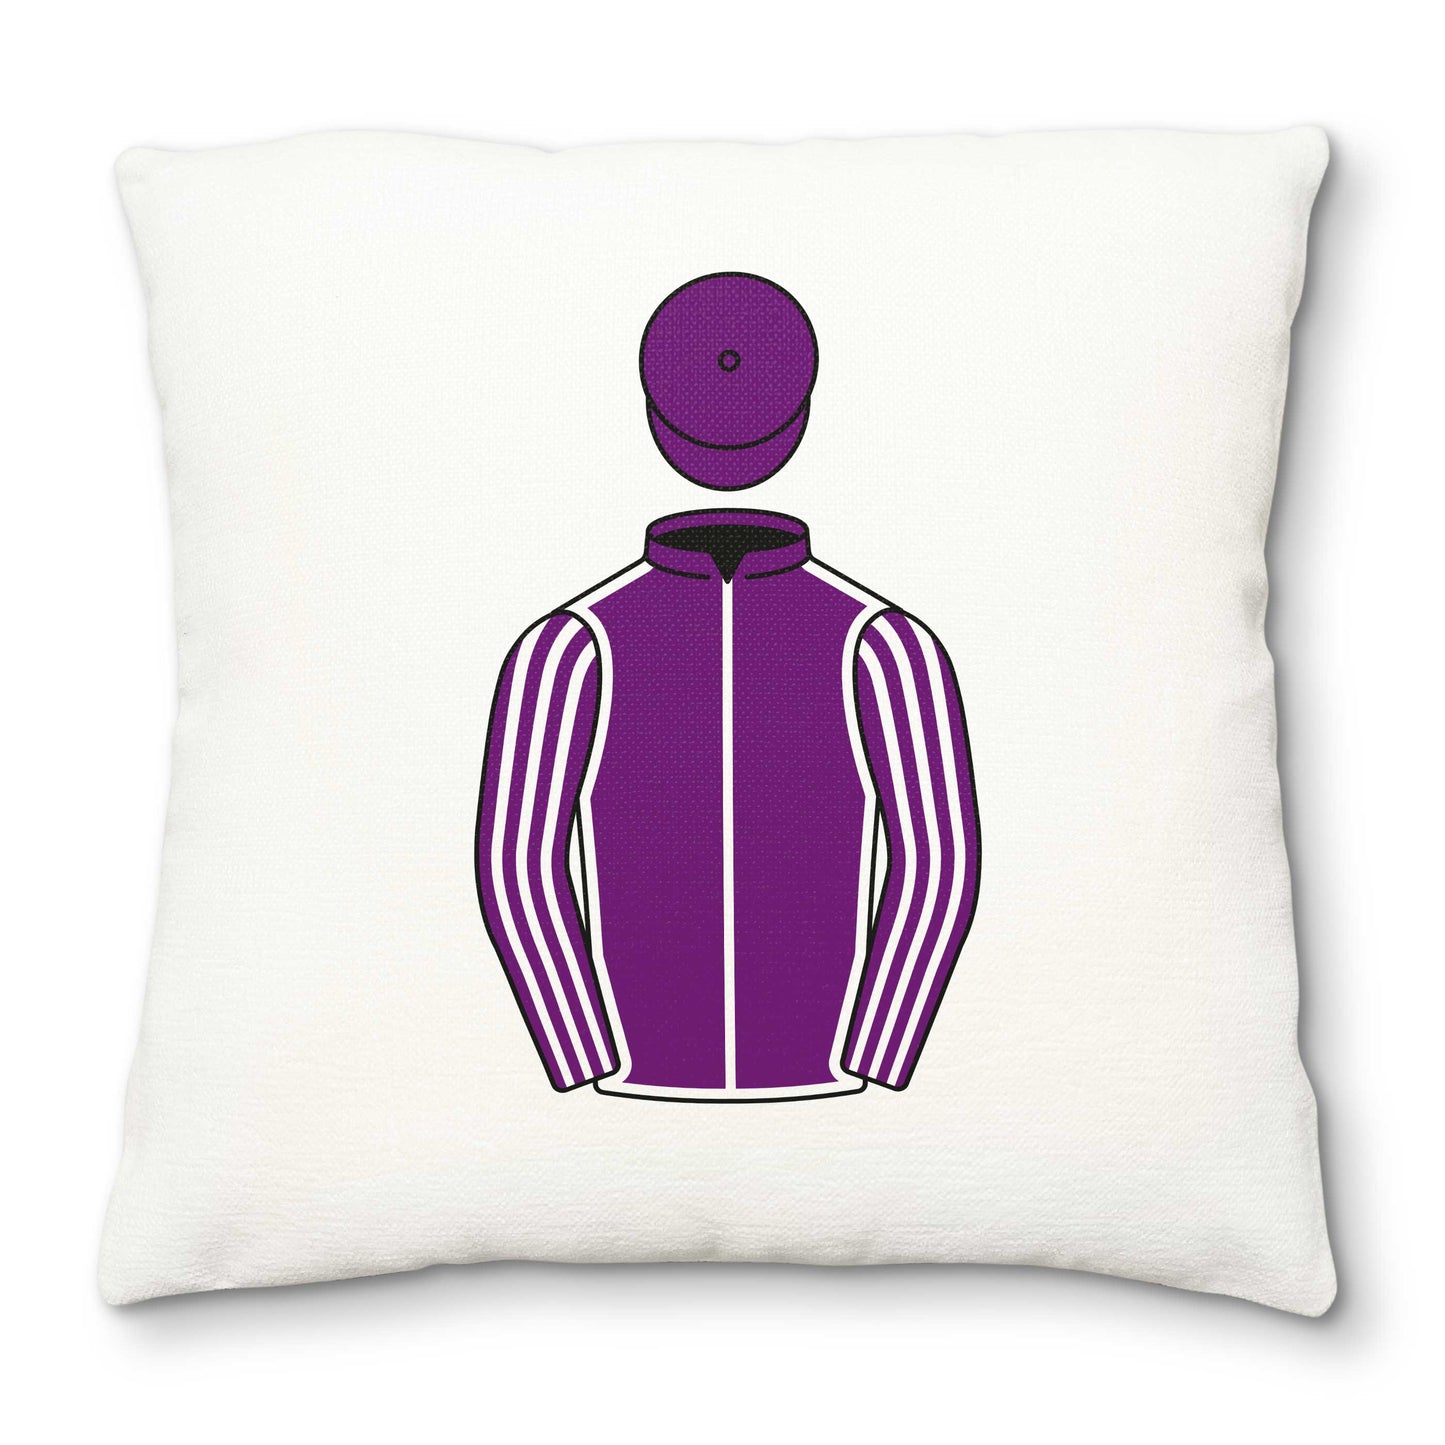 Derrick Smith Deluxe Cushion Cover - Deluxe Cushion Cover - Hacked Up